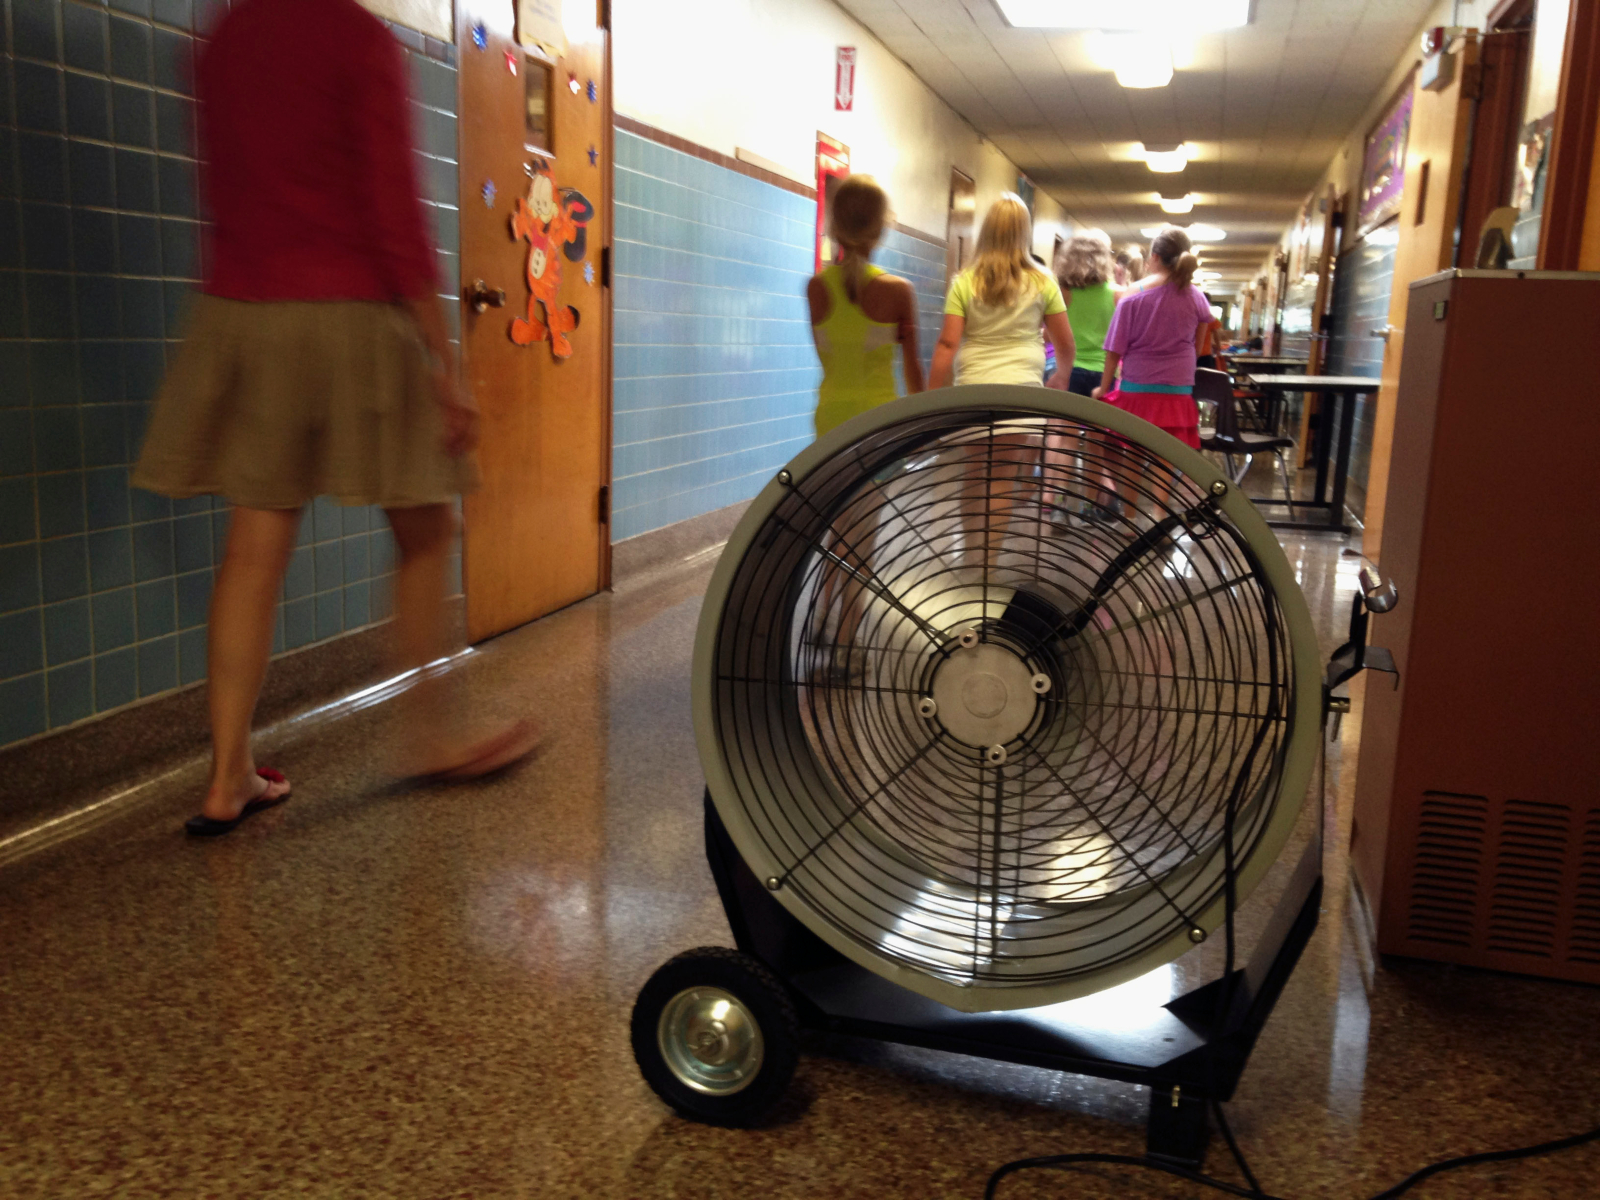 Three school children and a teacher walk through a hallway with blue tile on the wall. A large floor fan is seen in the middle of the hallway.